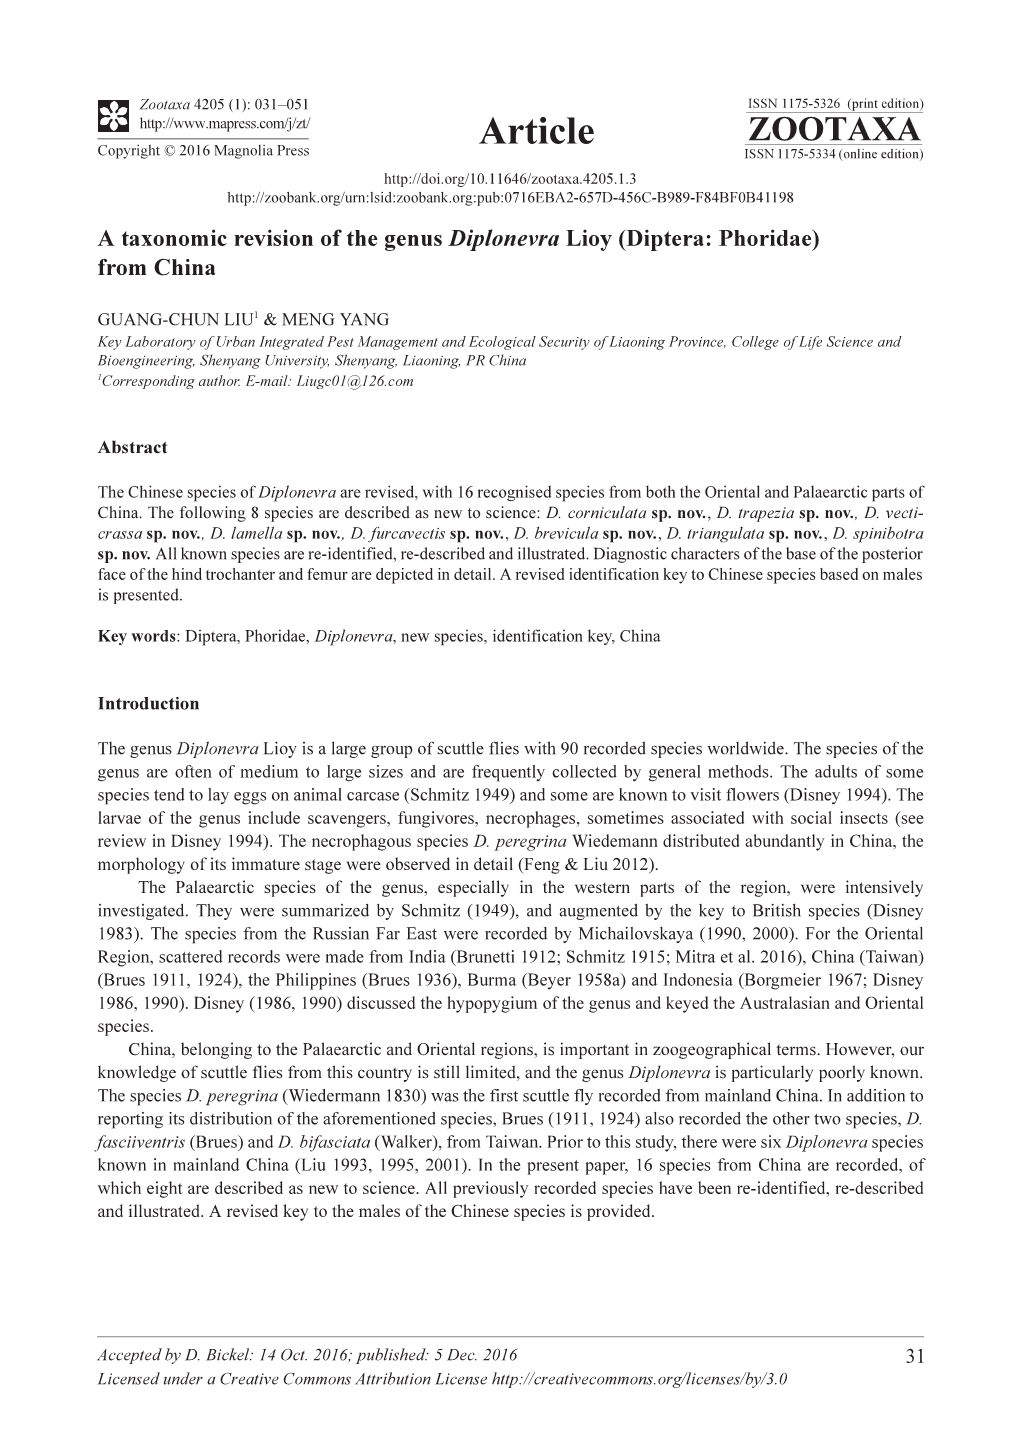 A Taxonomic Revision of the Genus Diplonevra Lioy (Diptera: Phoridae) from China